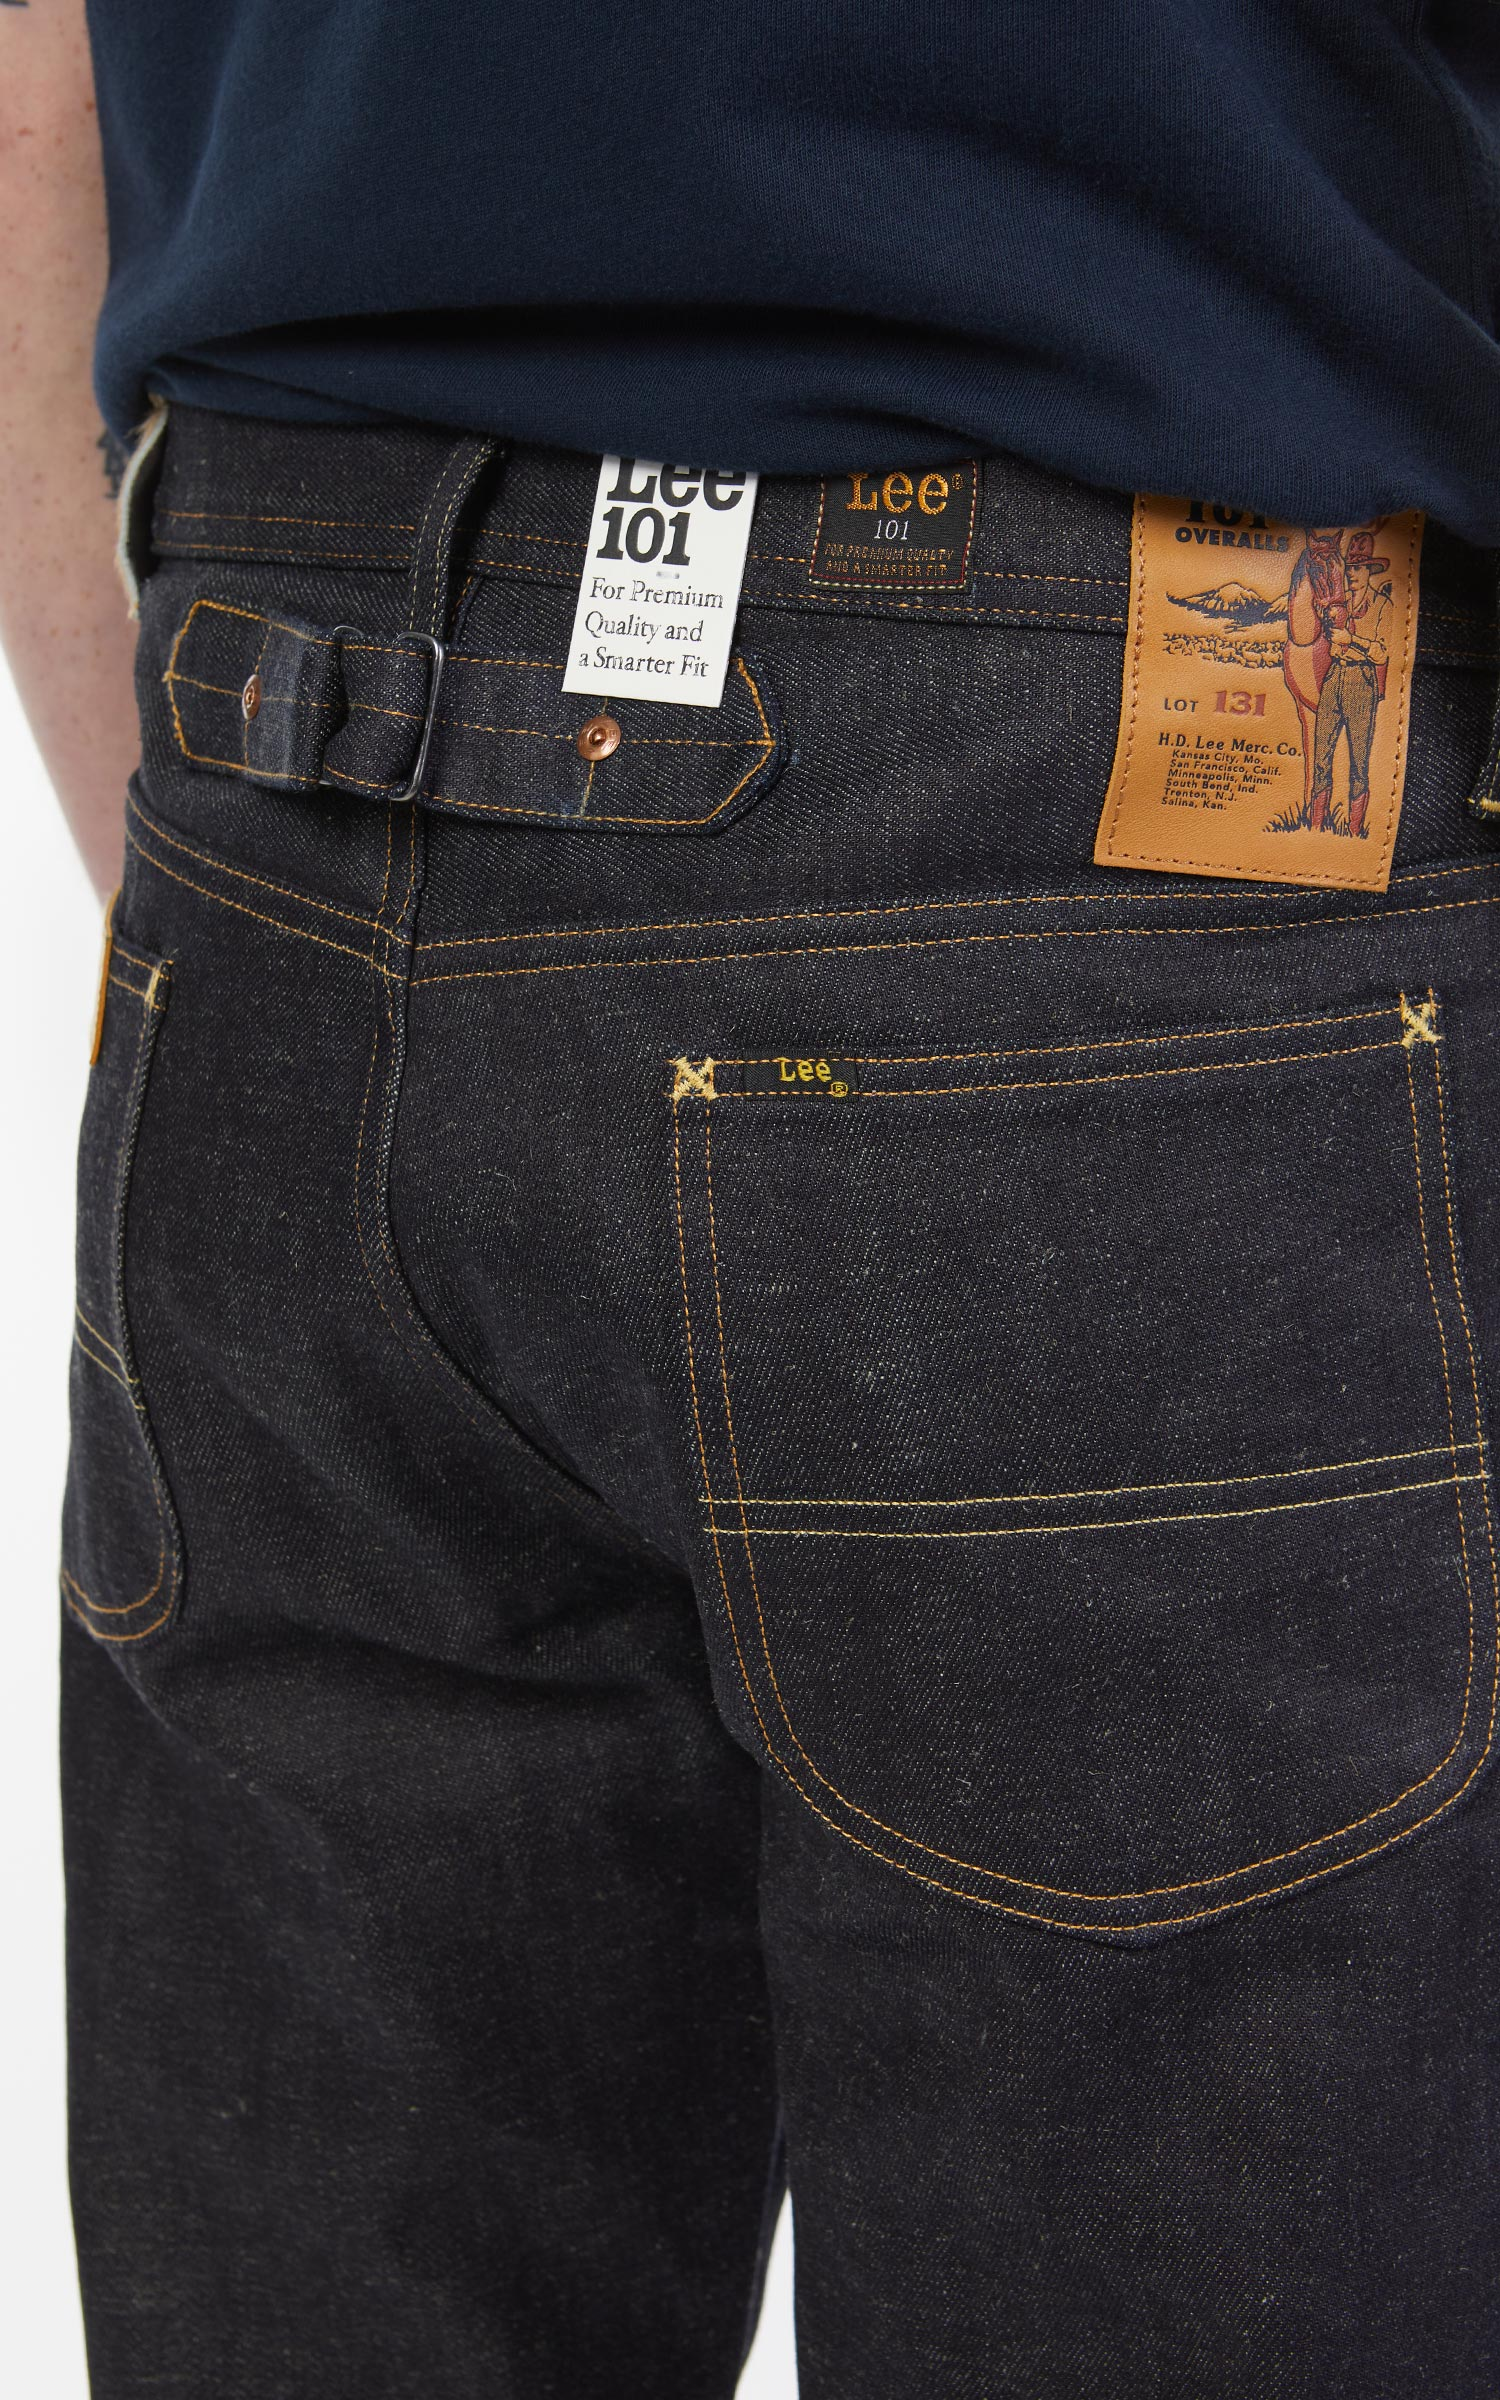 LEE 101 Cinch Back 14 oz Relaxed Fit Selvage Jean